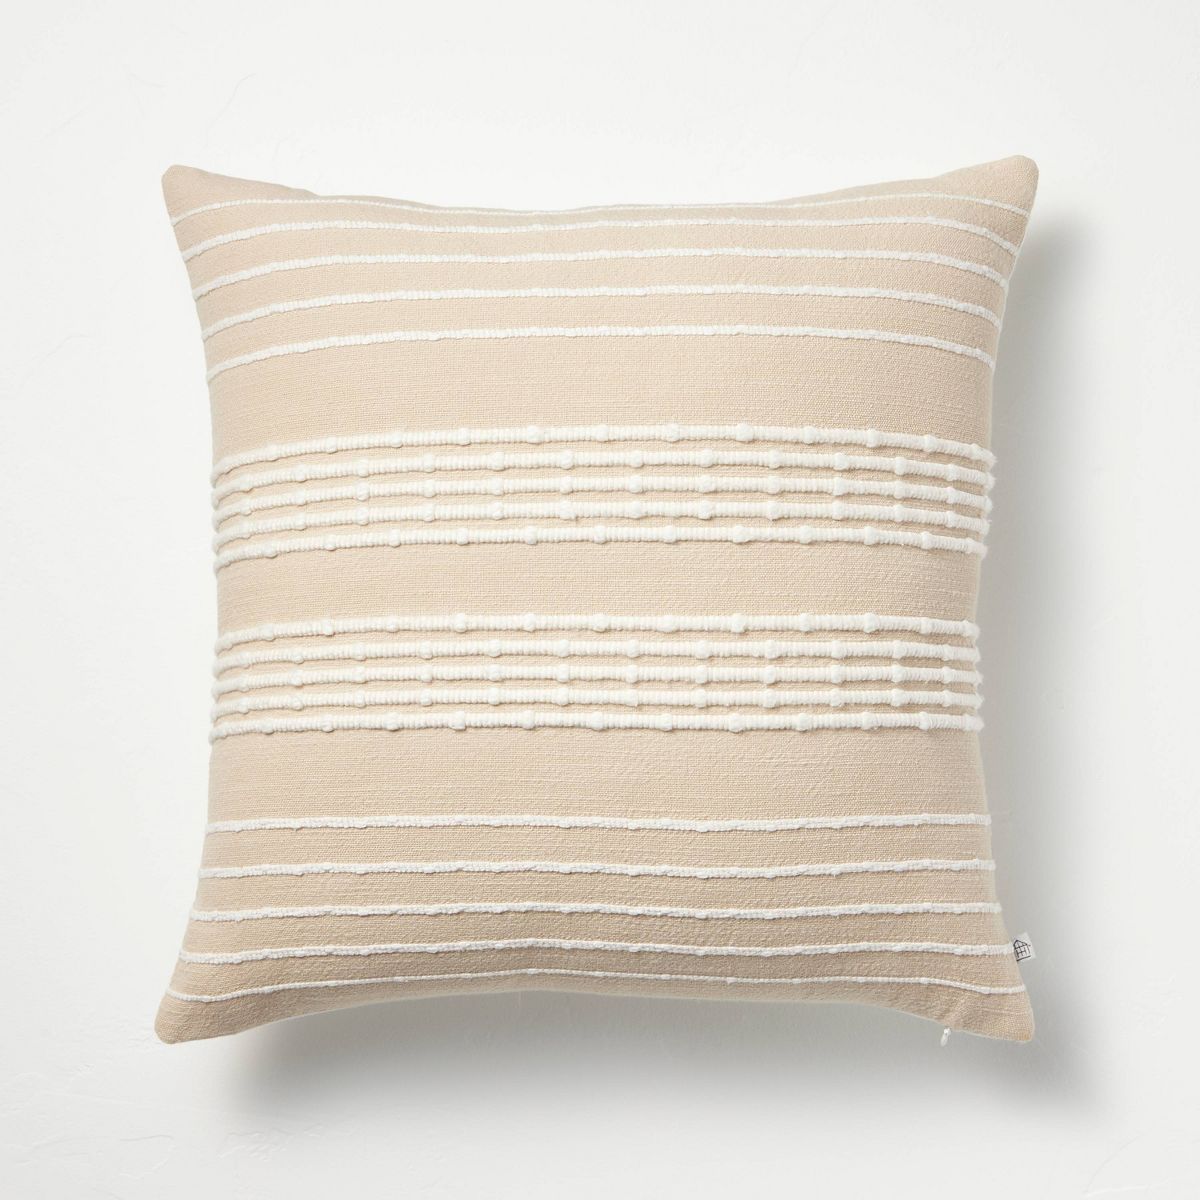 18"x18" Textured Bead Stripe Square Throw Pillow - Hearth & Hand™ with Magnolia | Target